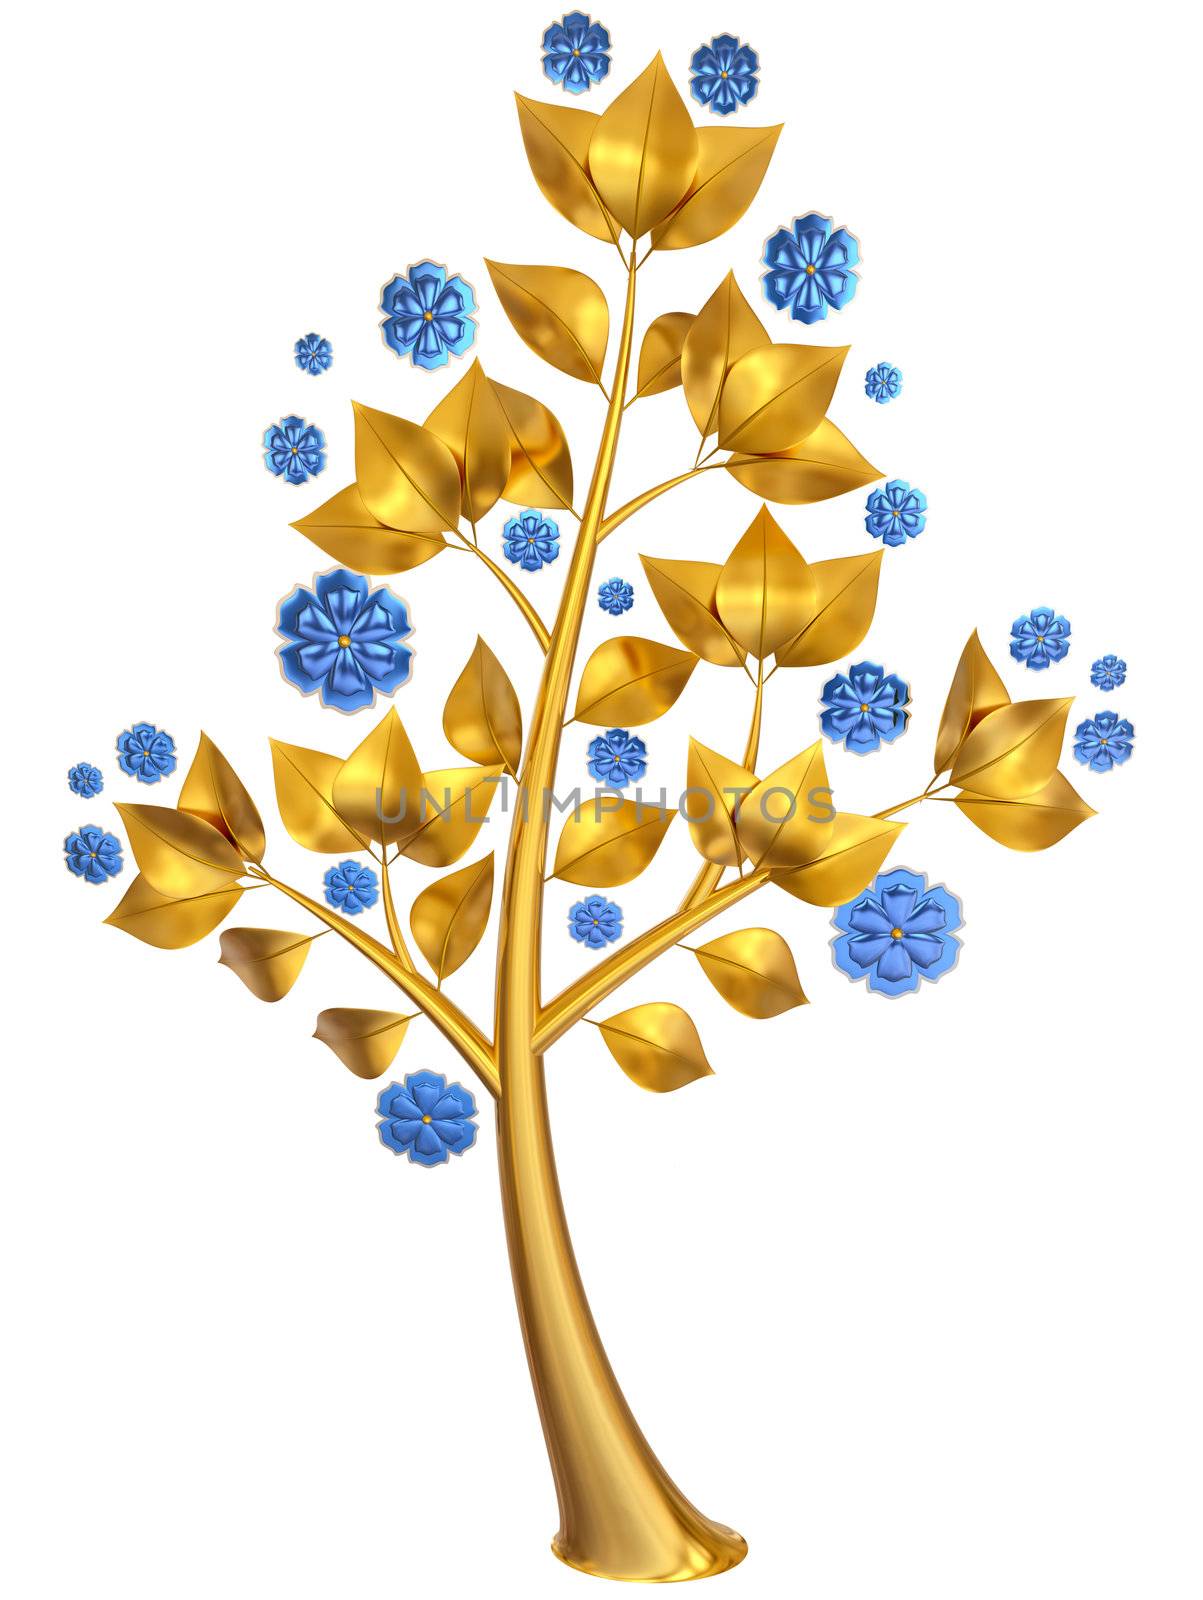 golden tree with blue flowers by merzavka